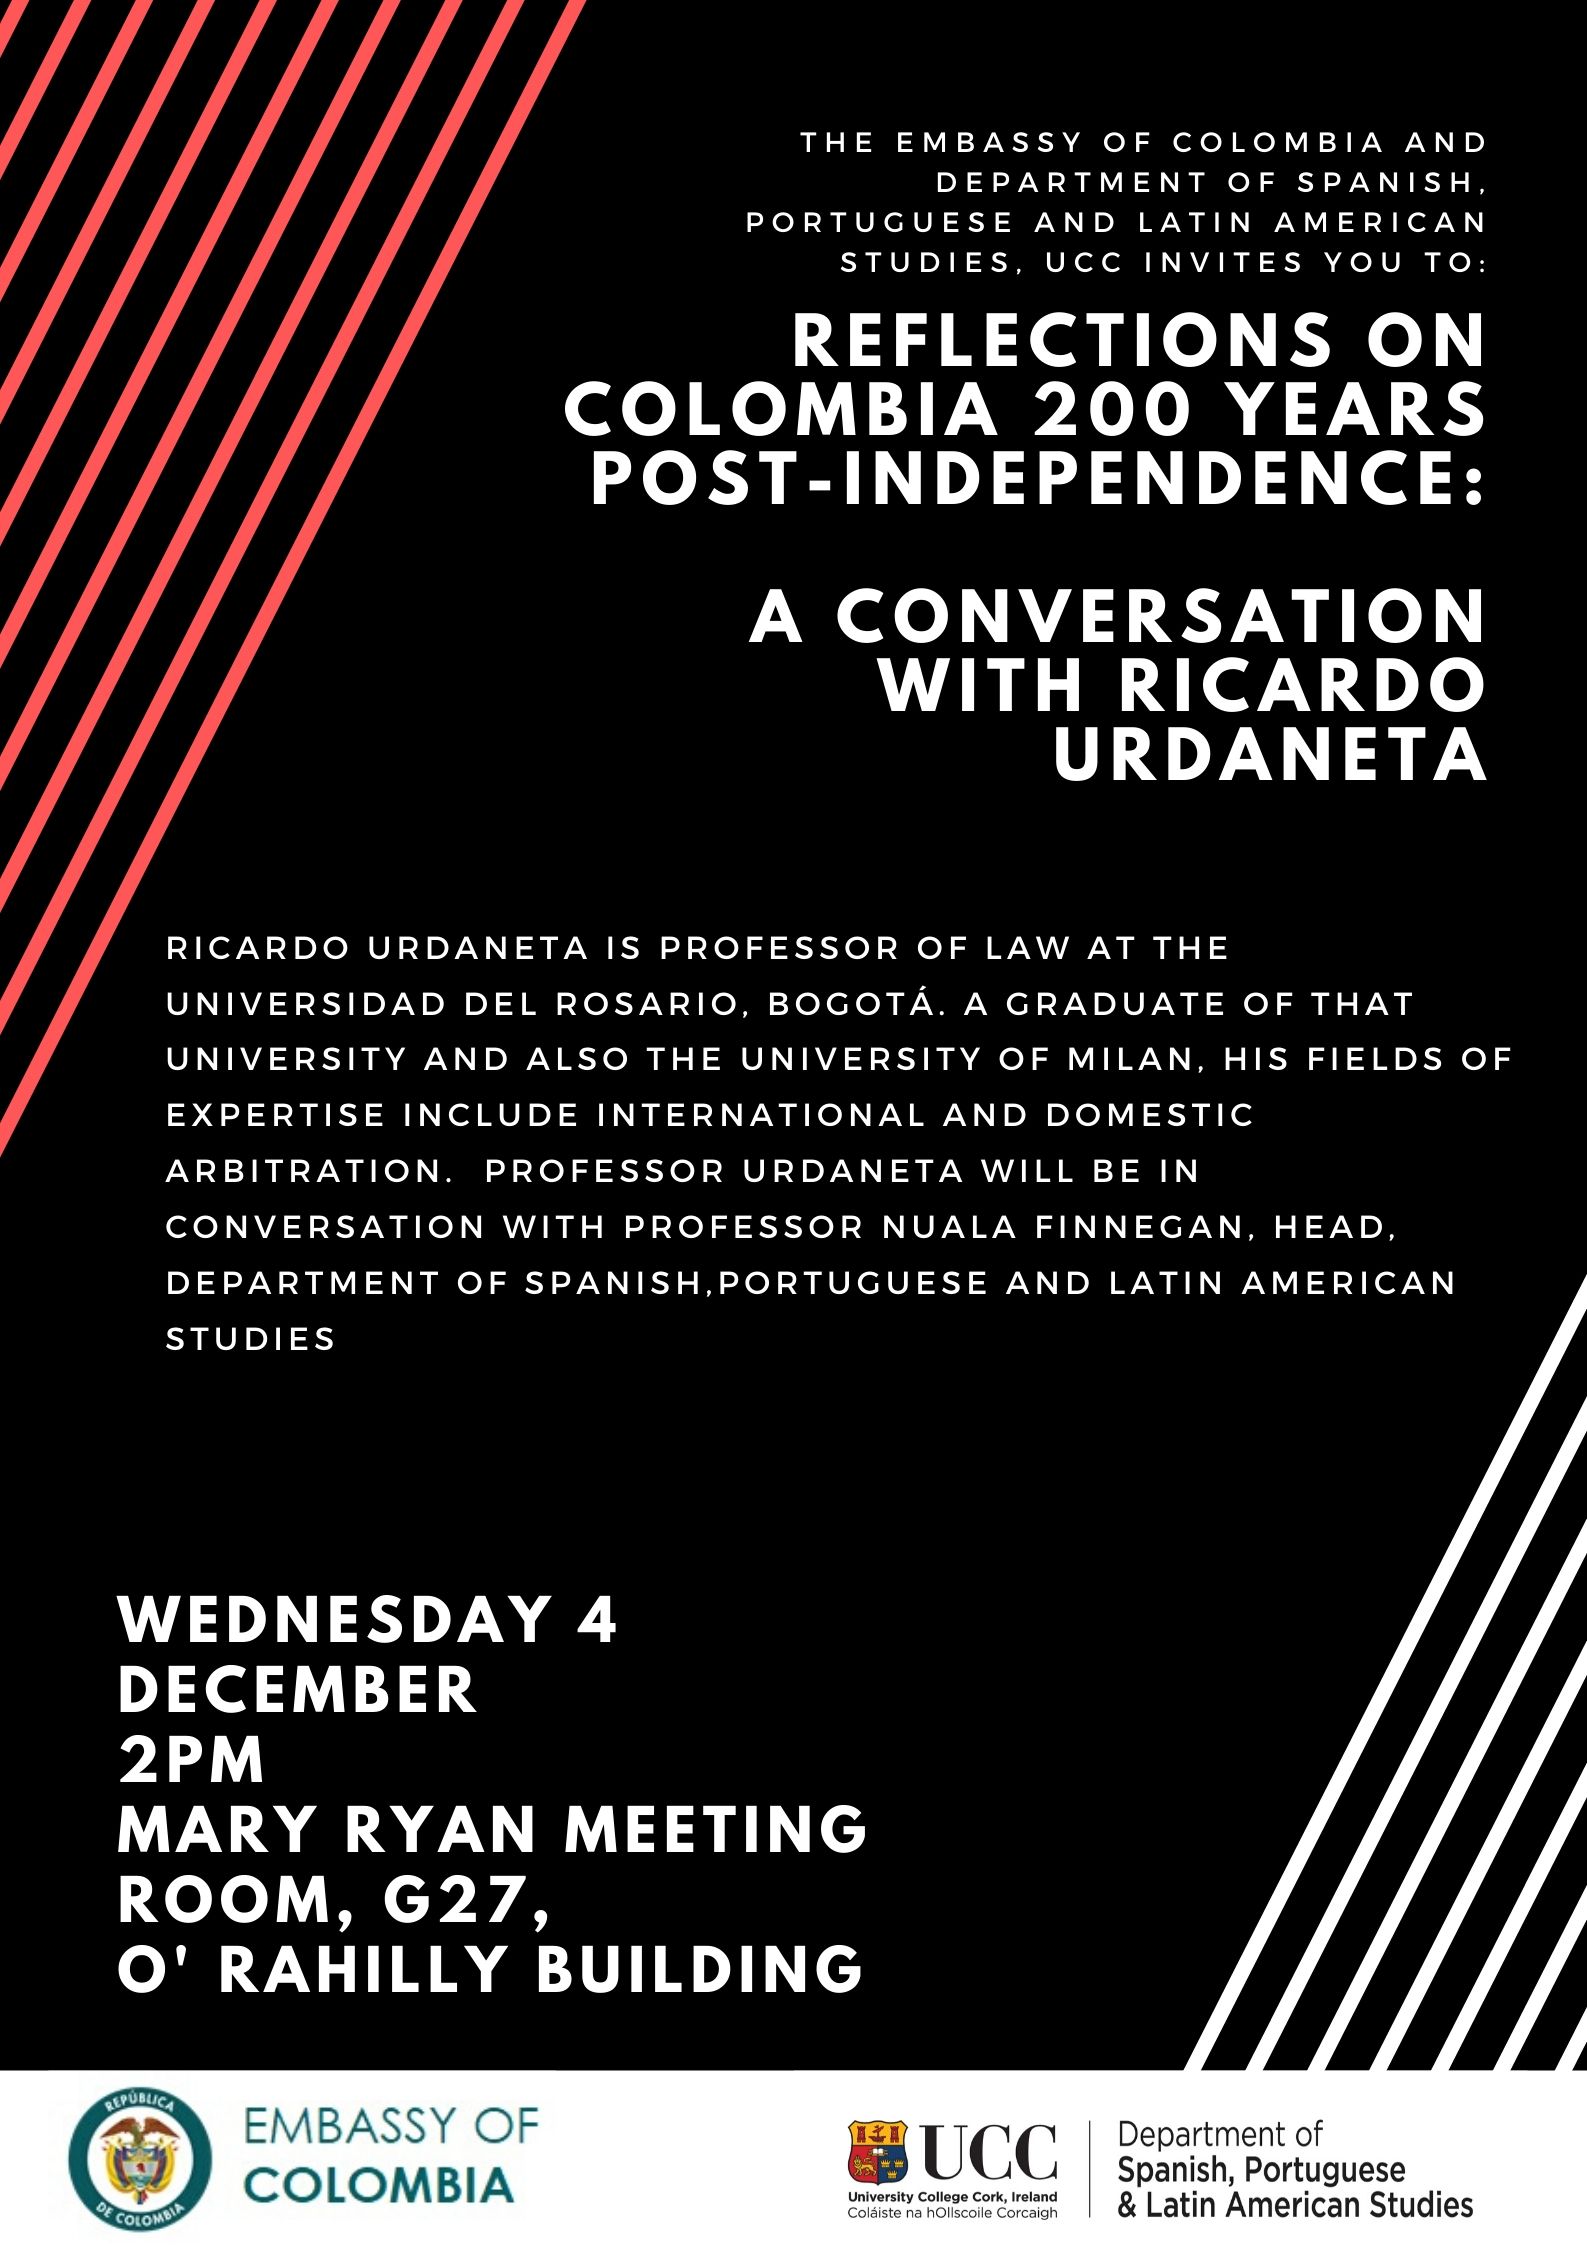 Reflections on Colombia 200 Years Post-Independence: A Conversation with Ricardo Urdaneta